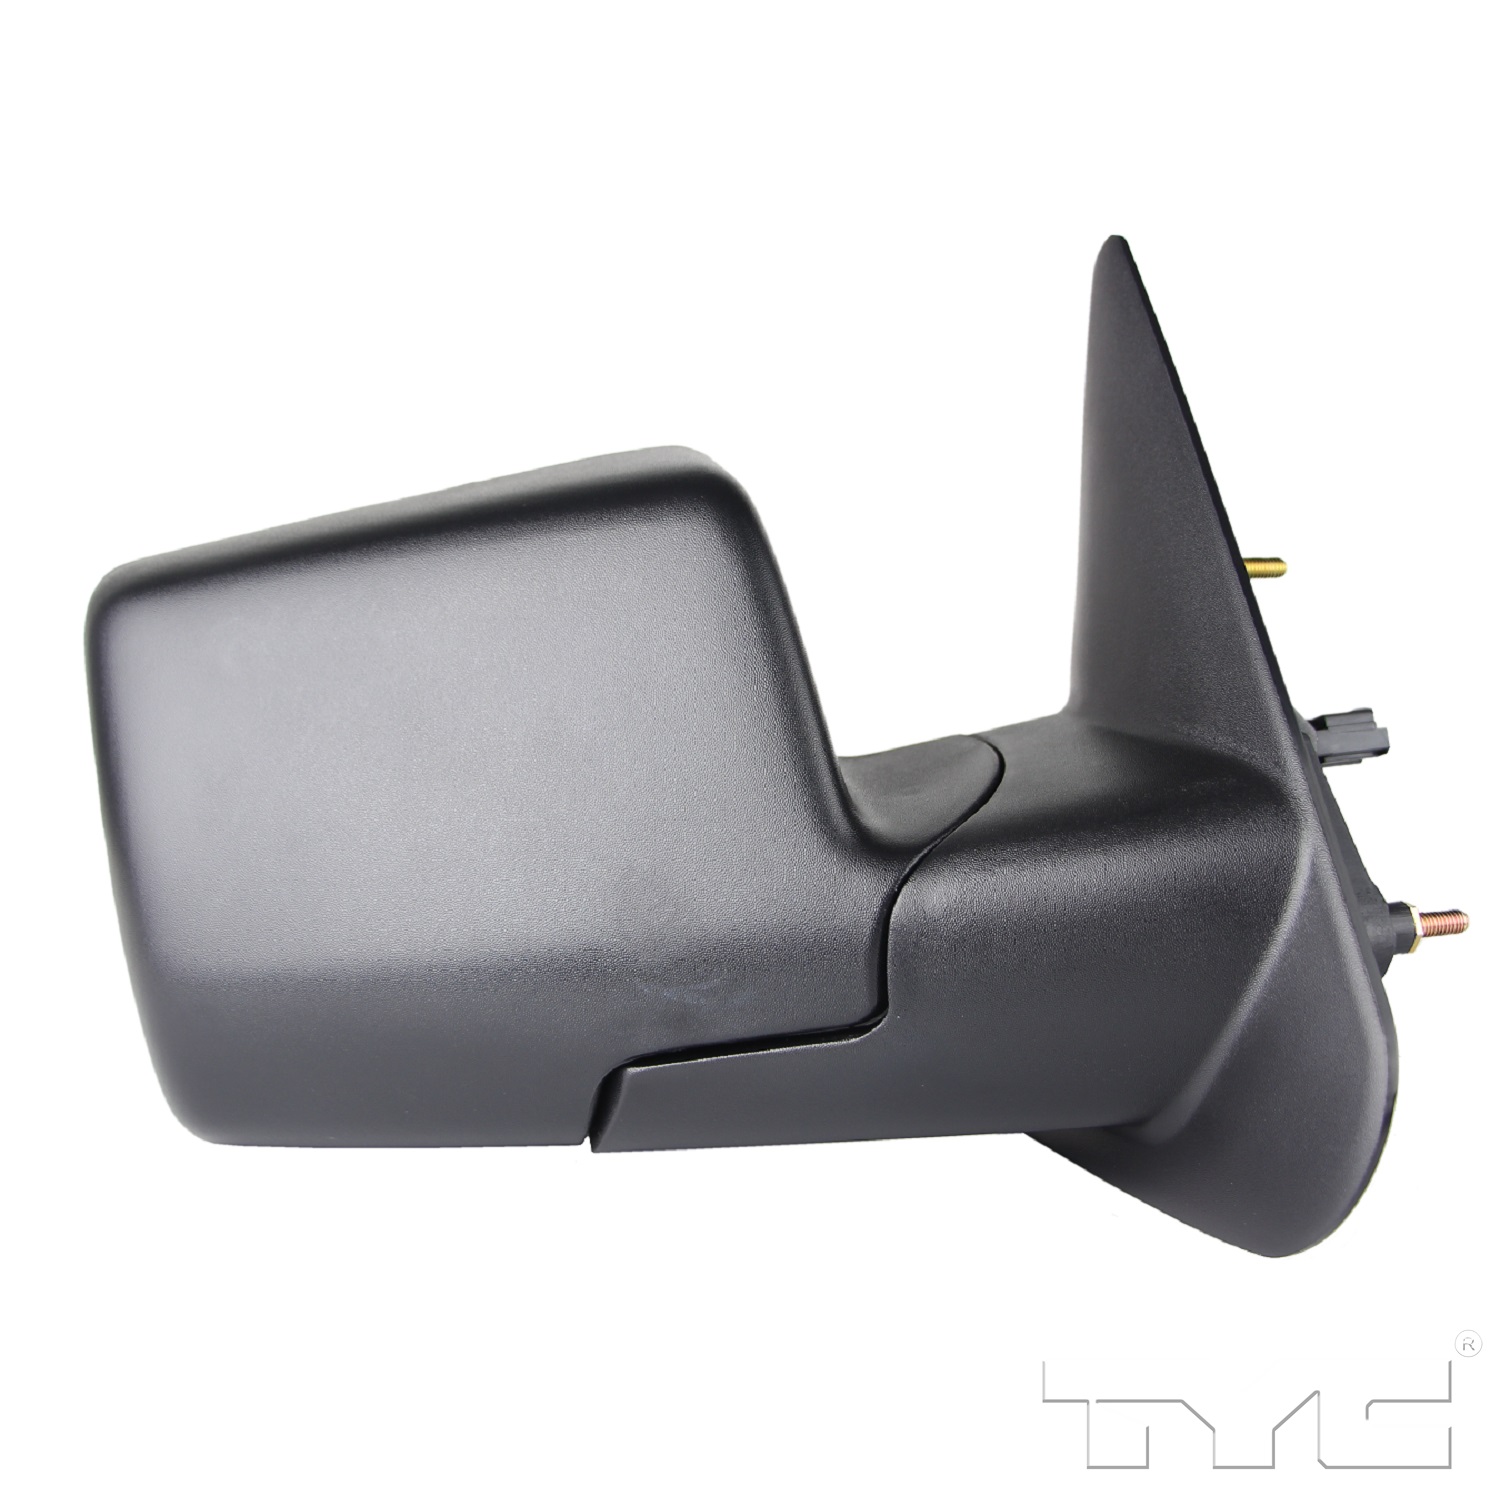 Aftermarket MIRRORS for MAZDA - B3000, B3000,06-07,RT Mirror outside rear view